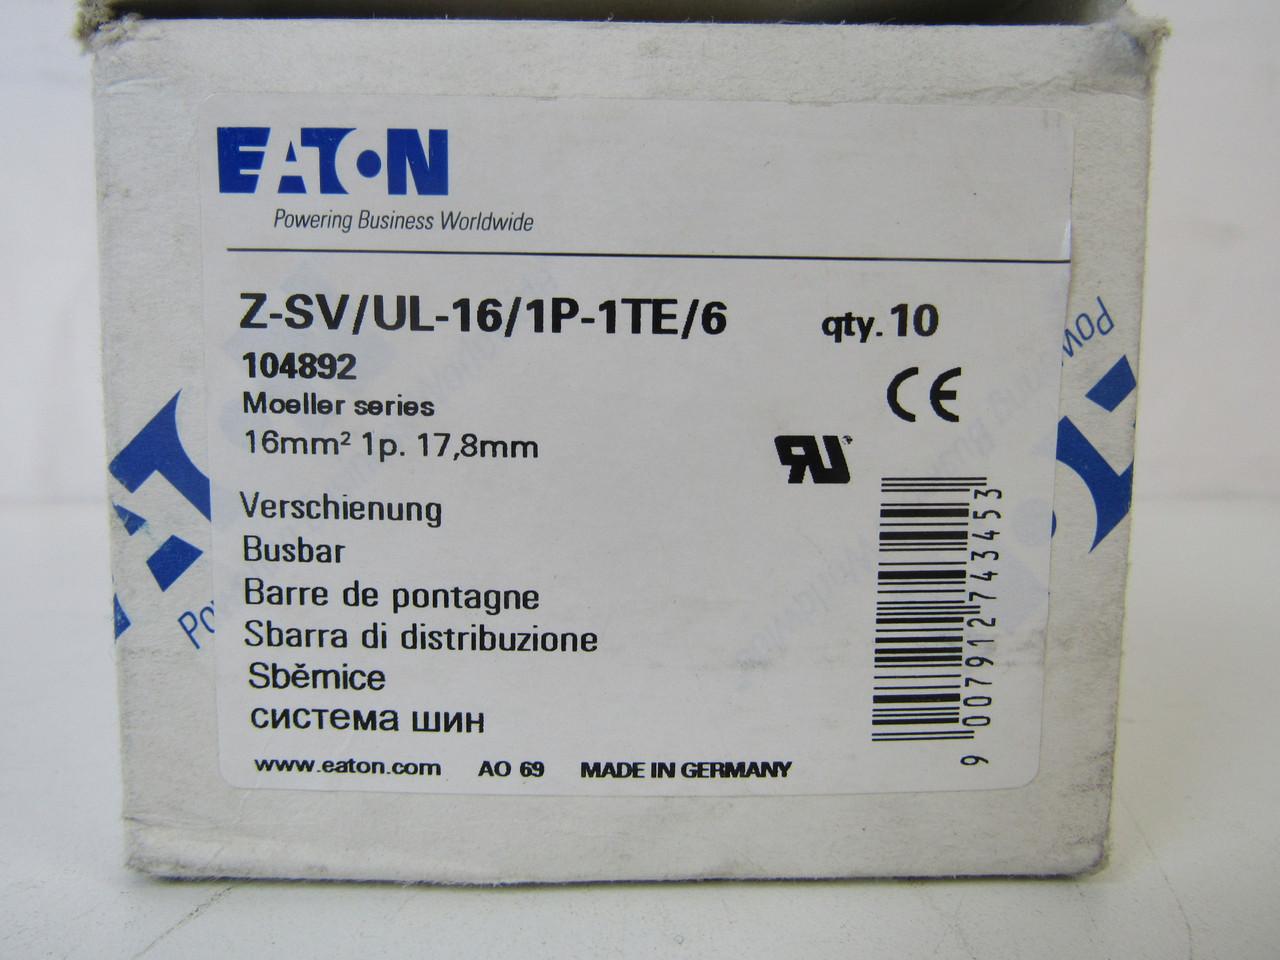 Eaton Z-SV/UL-16/1P-1TE/6 105 MM L, 16 Sq MM Cross Section, 690 V, 80 A, 1-Phase, 1-Pole, 6-Terminal, Pin Connection, Insulated